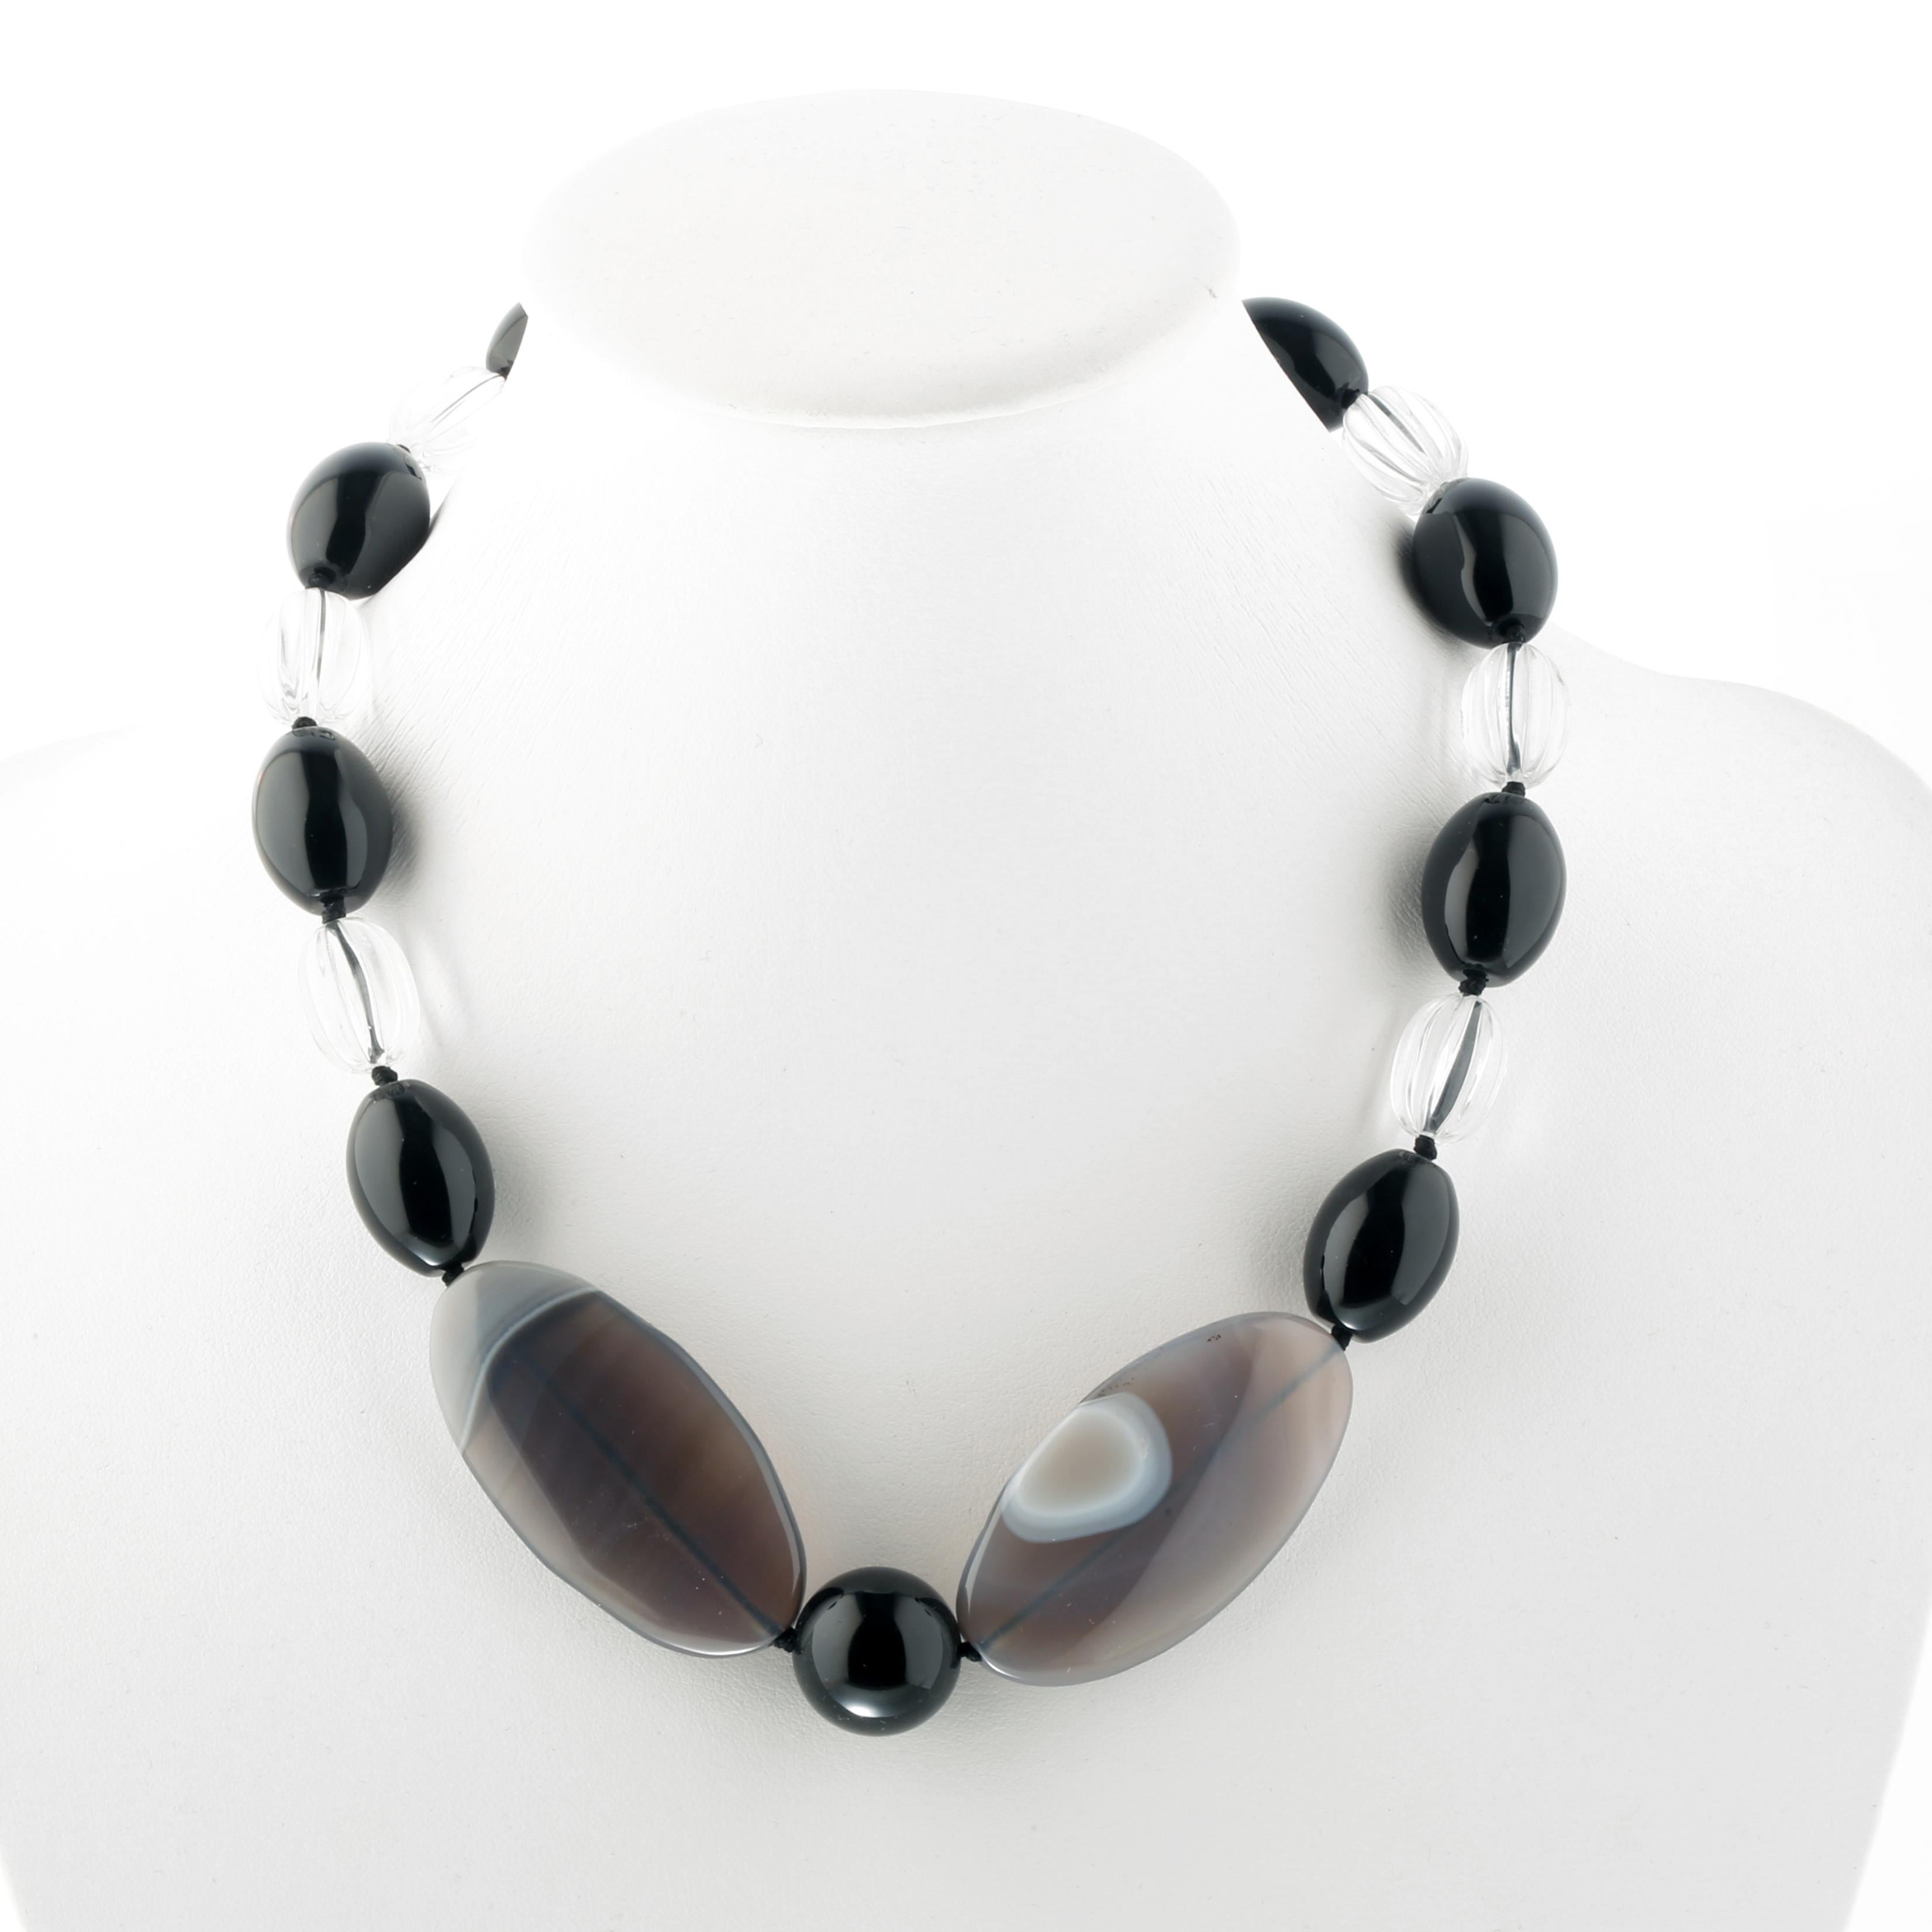 Hard stones jewellery, set on a unique and marvellous design for a light and everyday necklace.
 The perfect accessory for your Autumn outfits.

• 925 sterling silver lobster closure
• Black and Grey Agate
• Rock Crystal
• Total weight 111 g
• Total